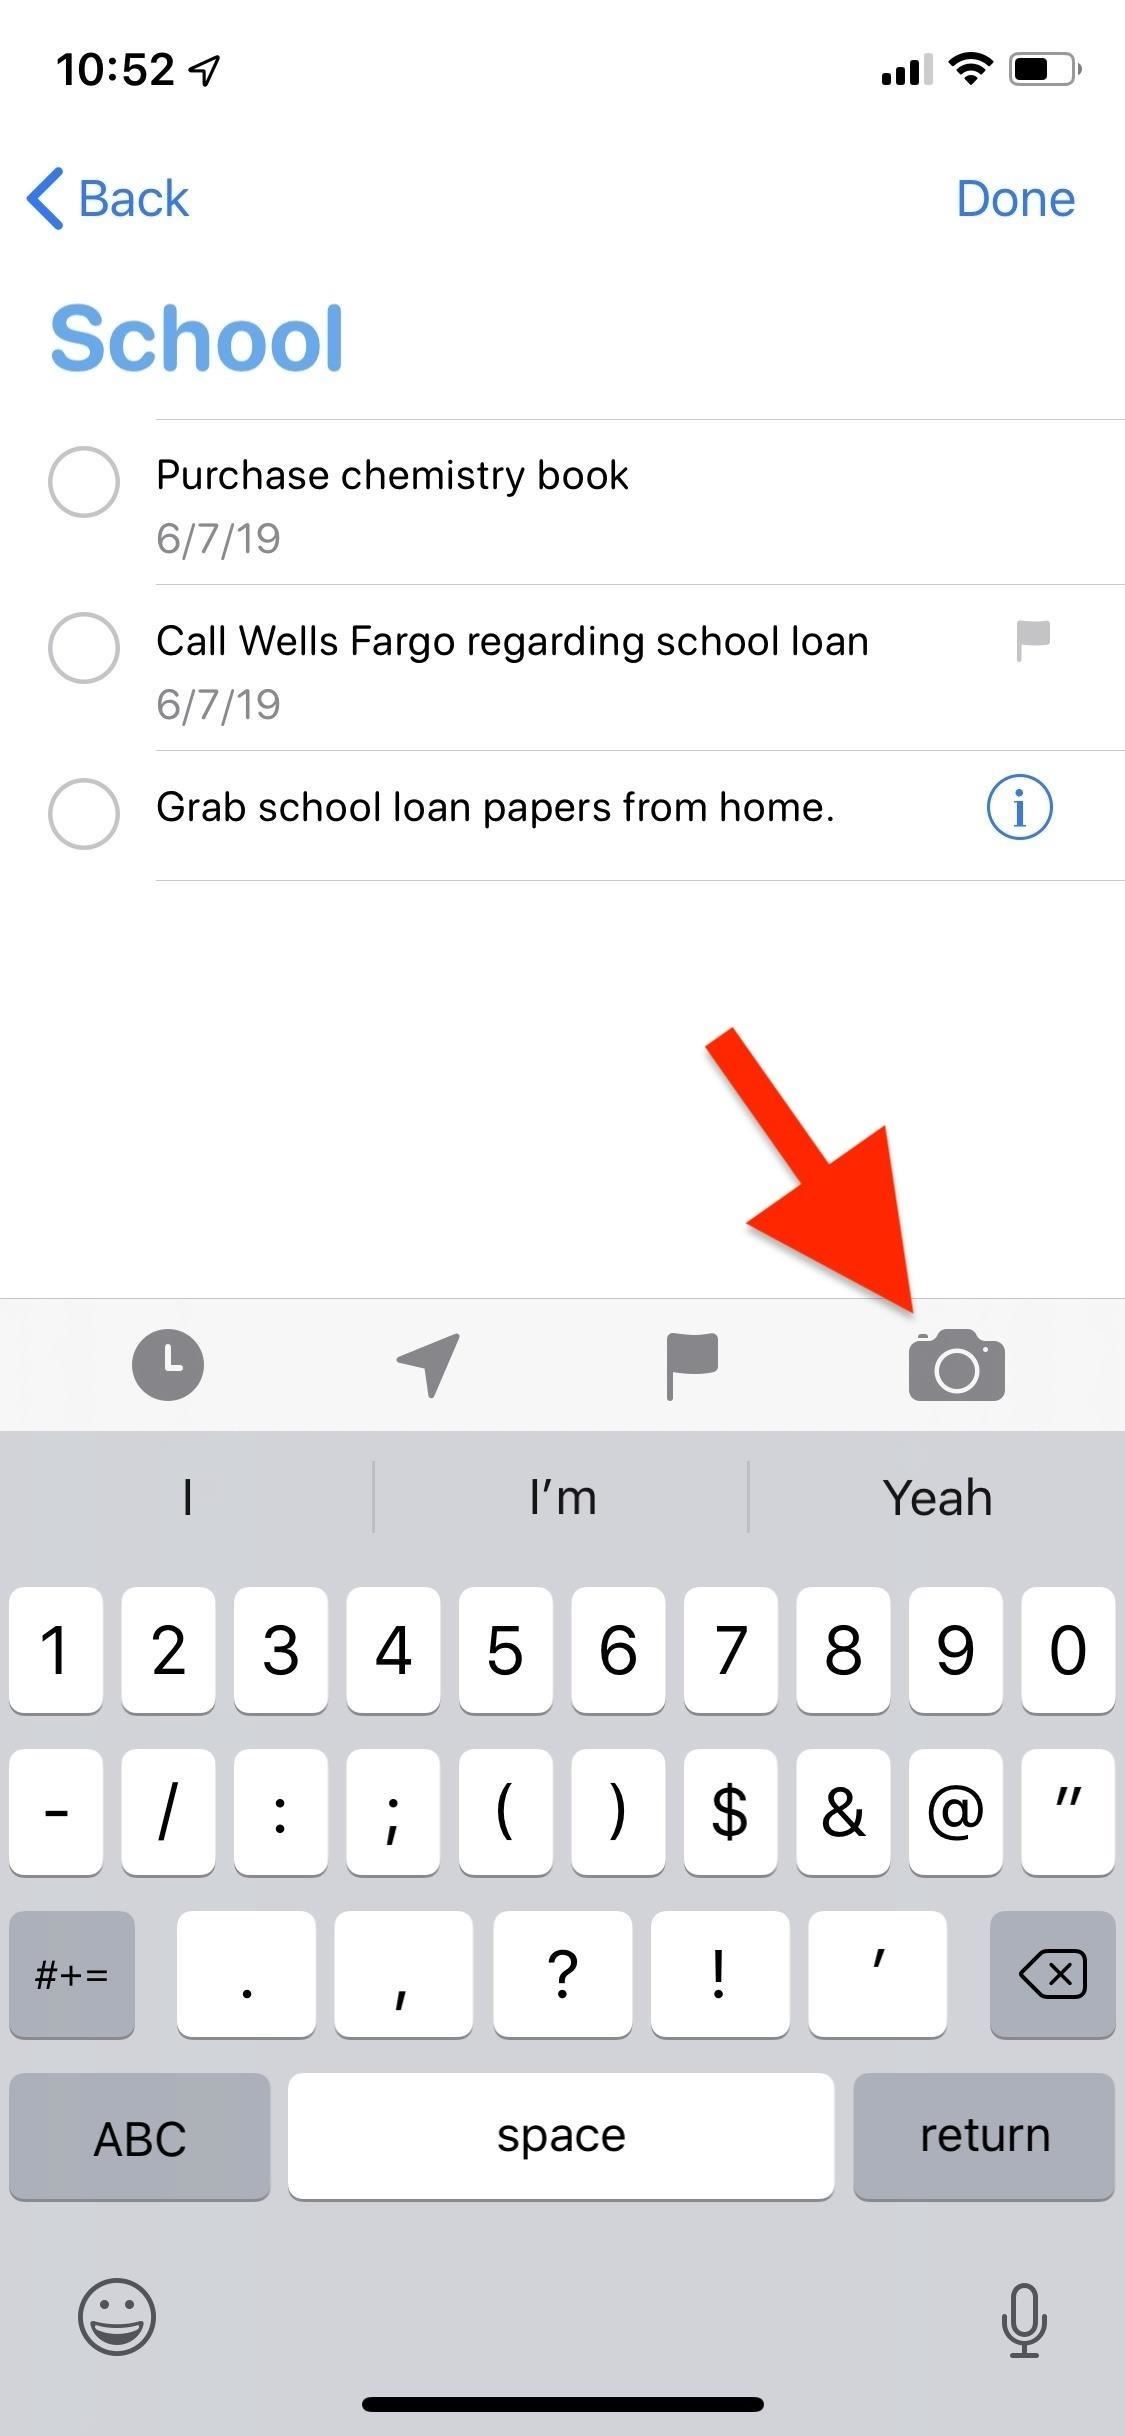 How to Attach Photos, Document Scans & Web Links to Reminders in iOS 13